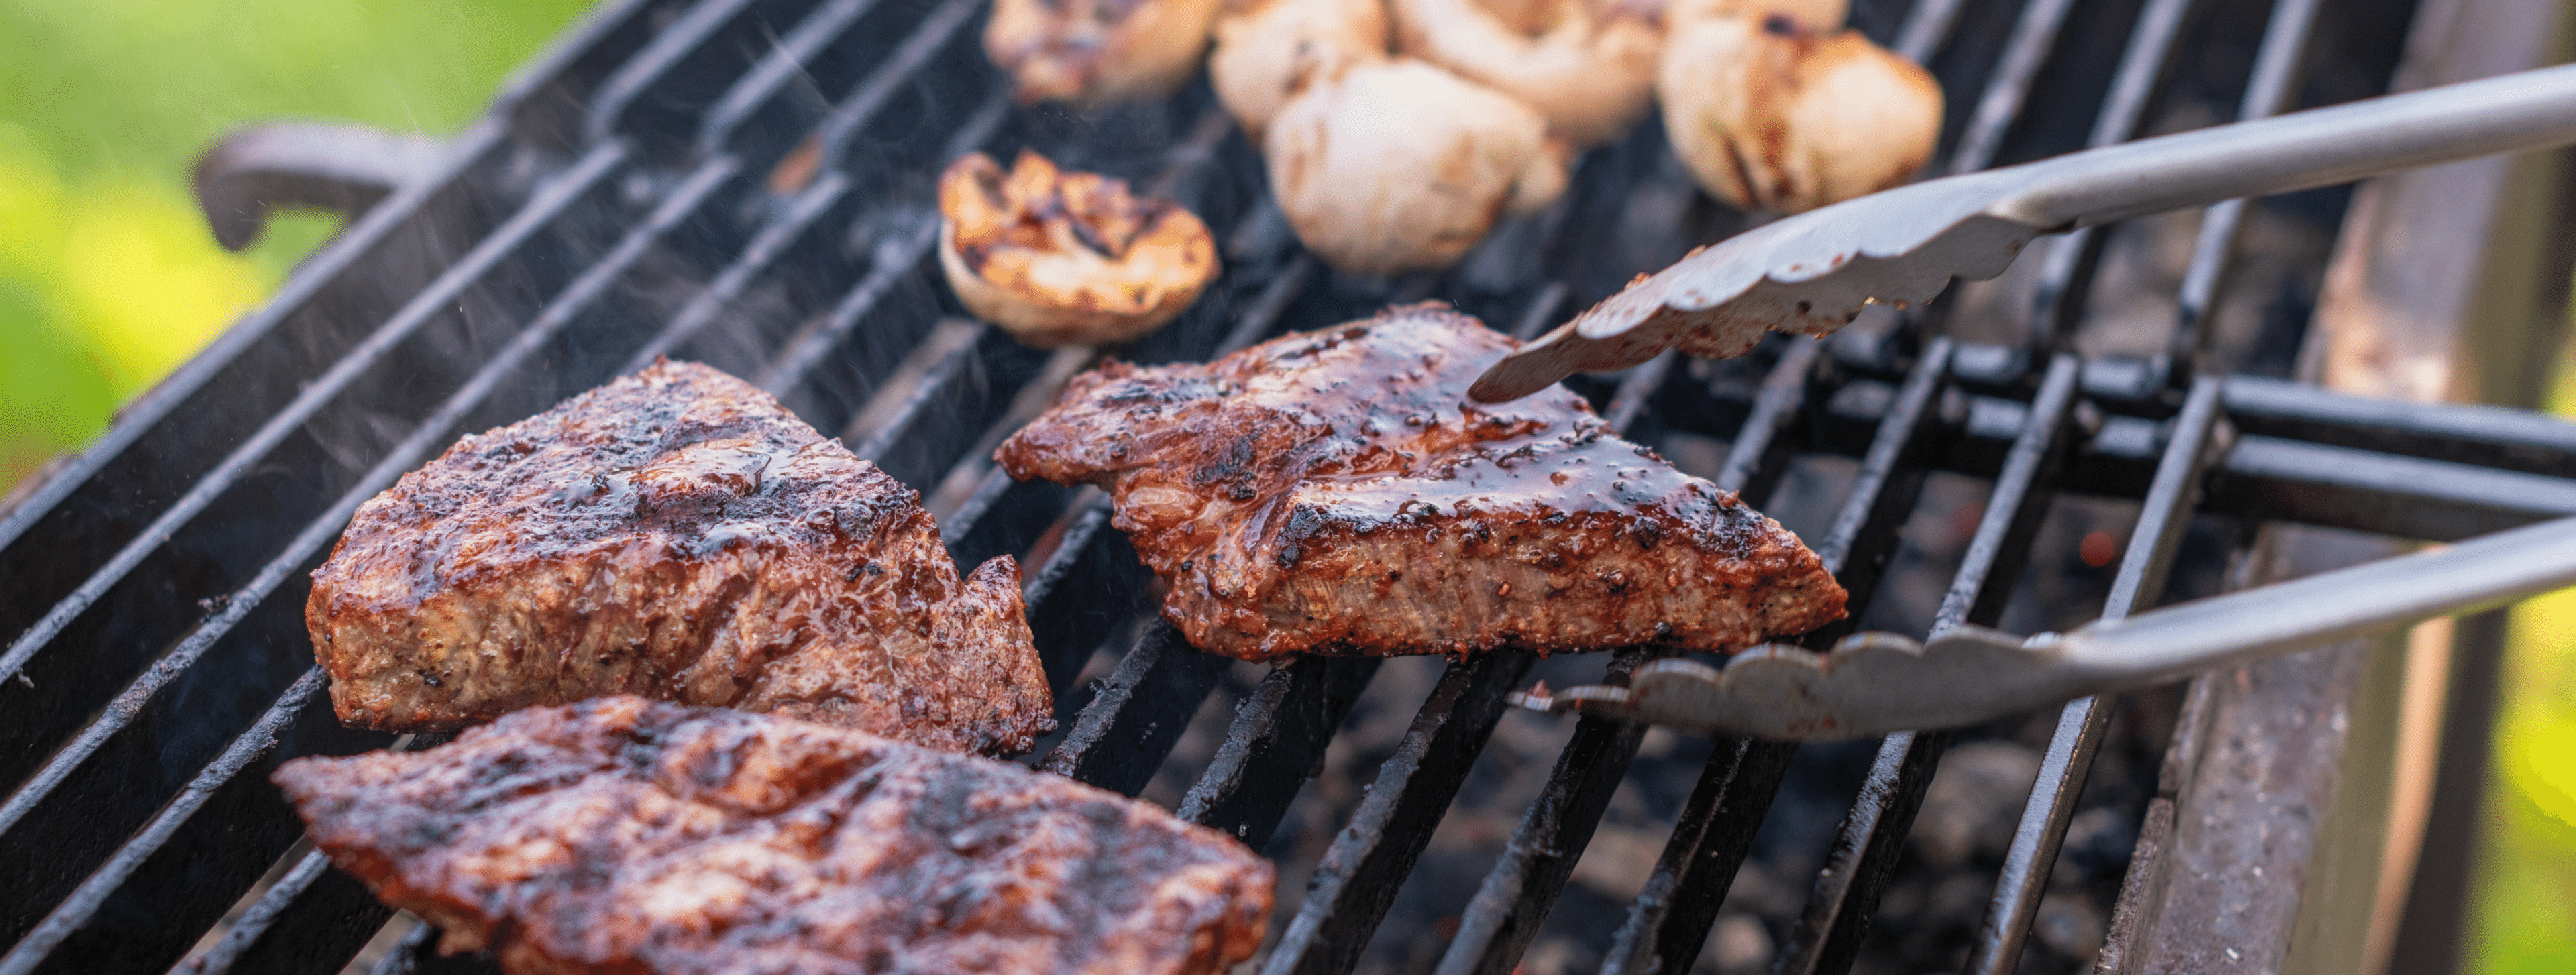 Grilling gaffes to Avoid